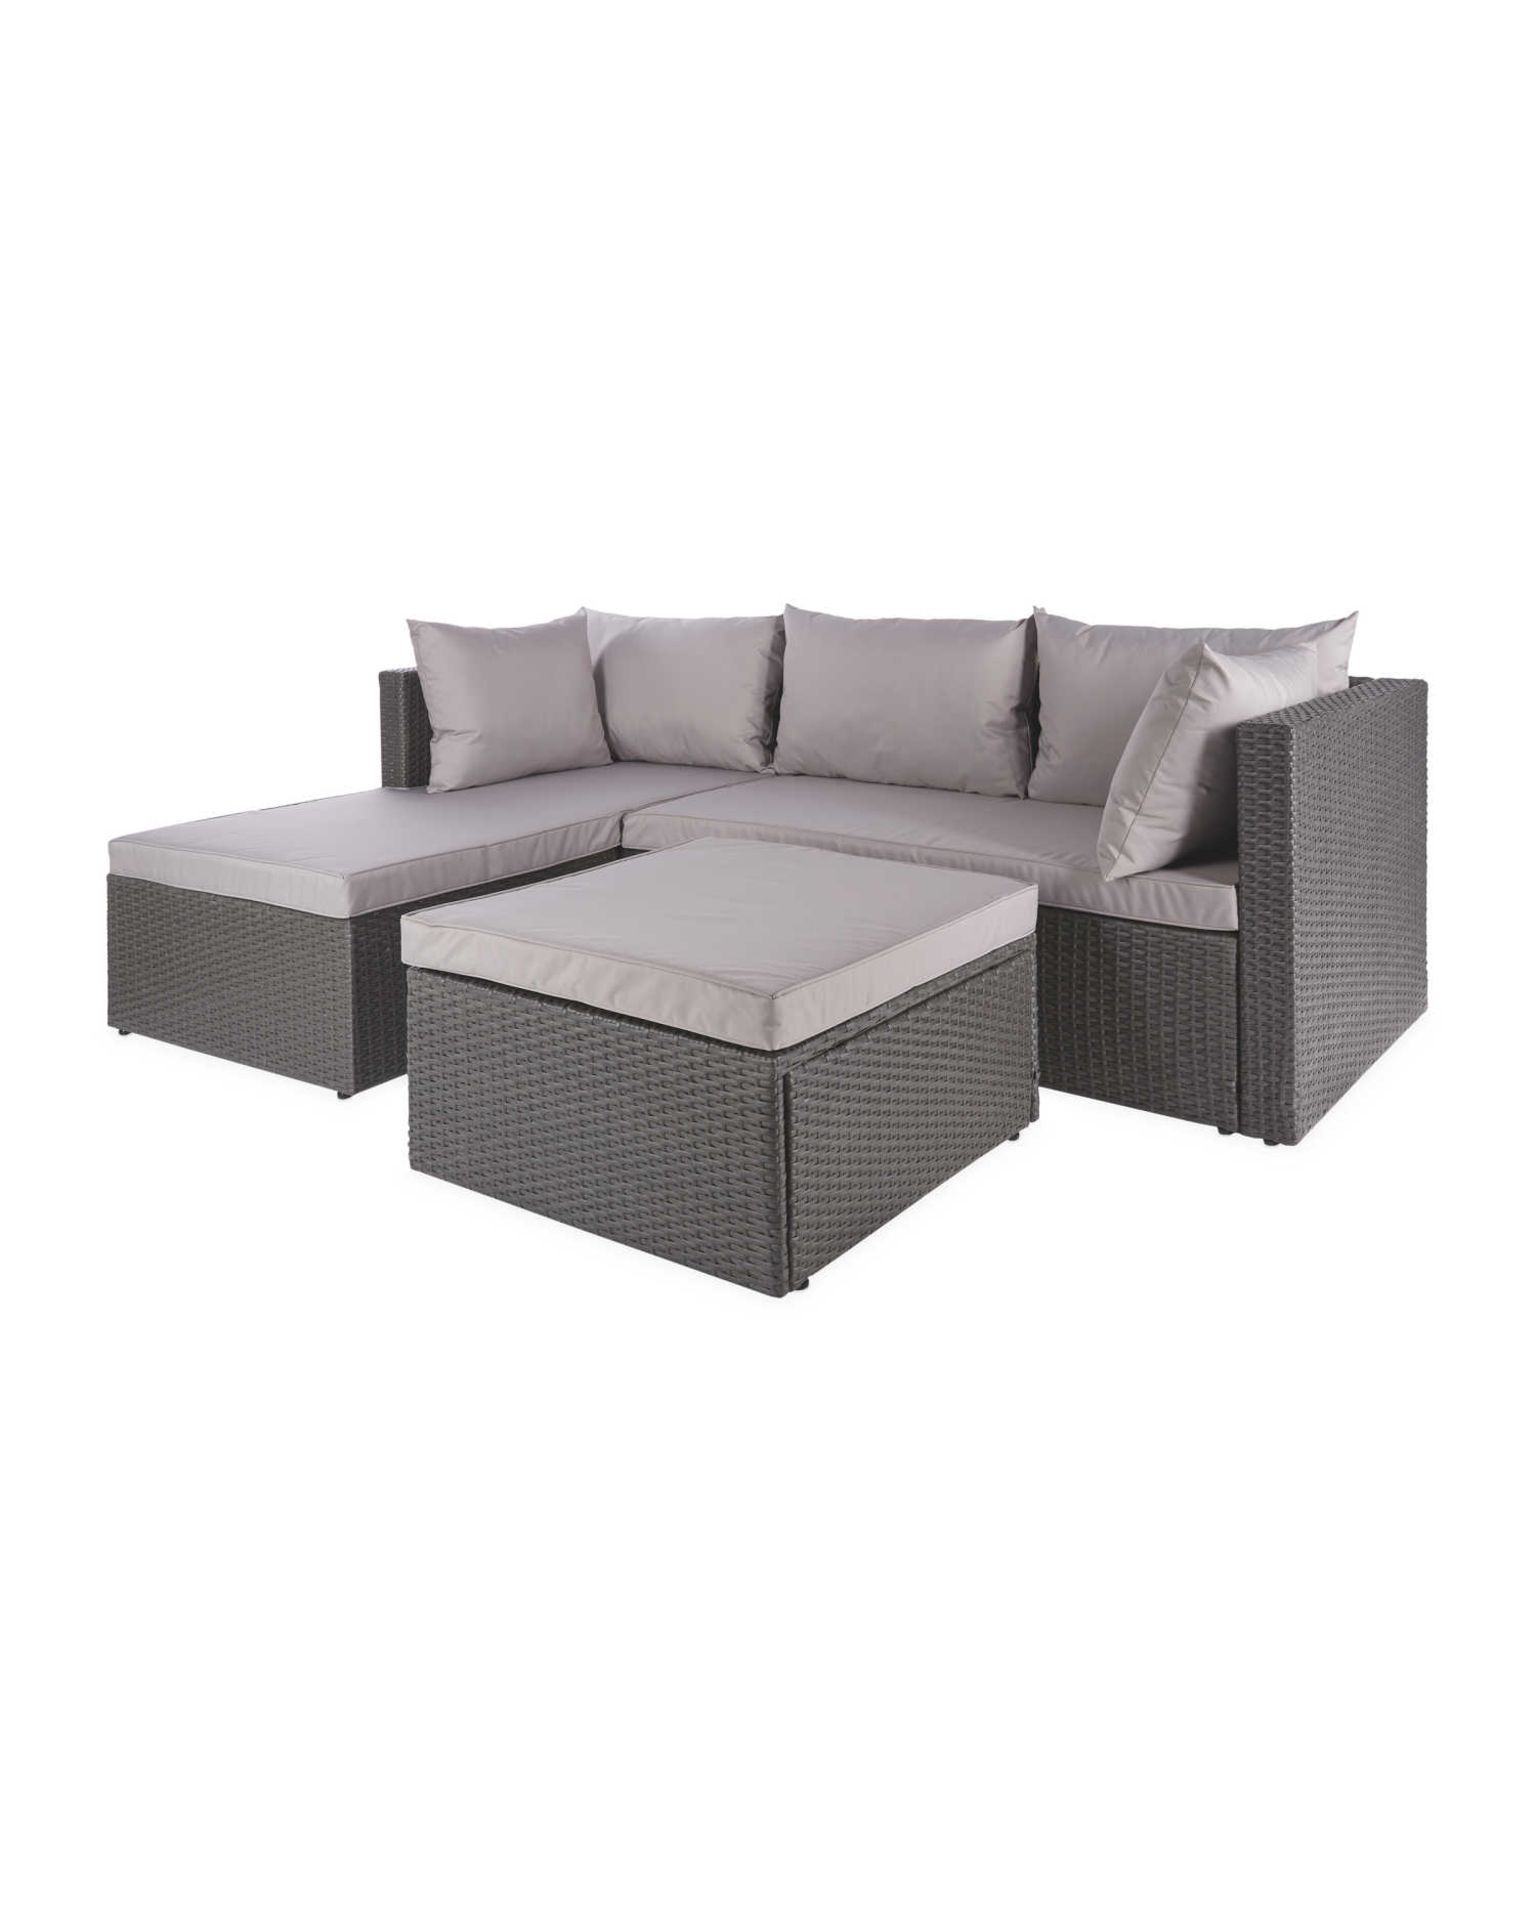 New & Boxed Luxury Grey & Anthracite Corner Sofa Set. Soak in the sun and feel that summer breeze - Image 4 of 4